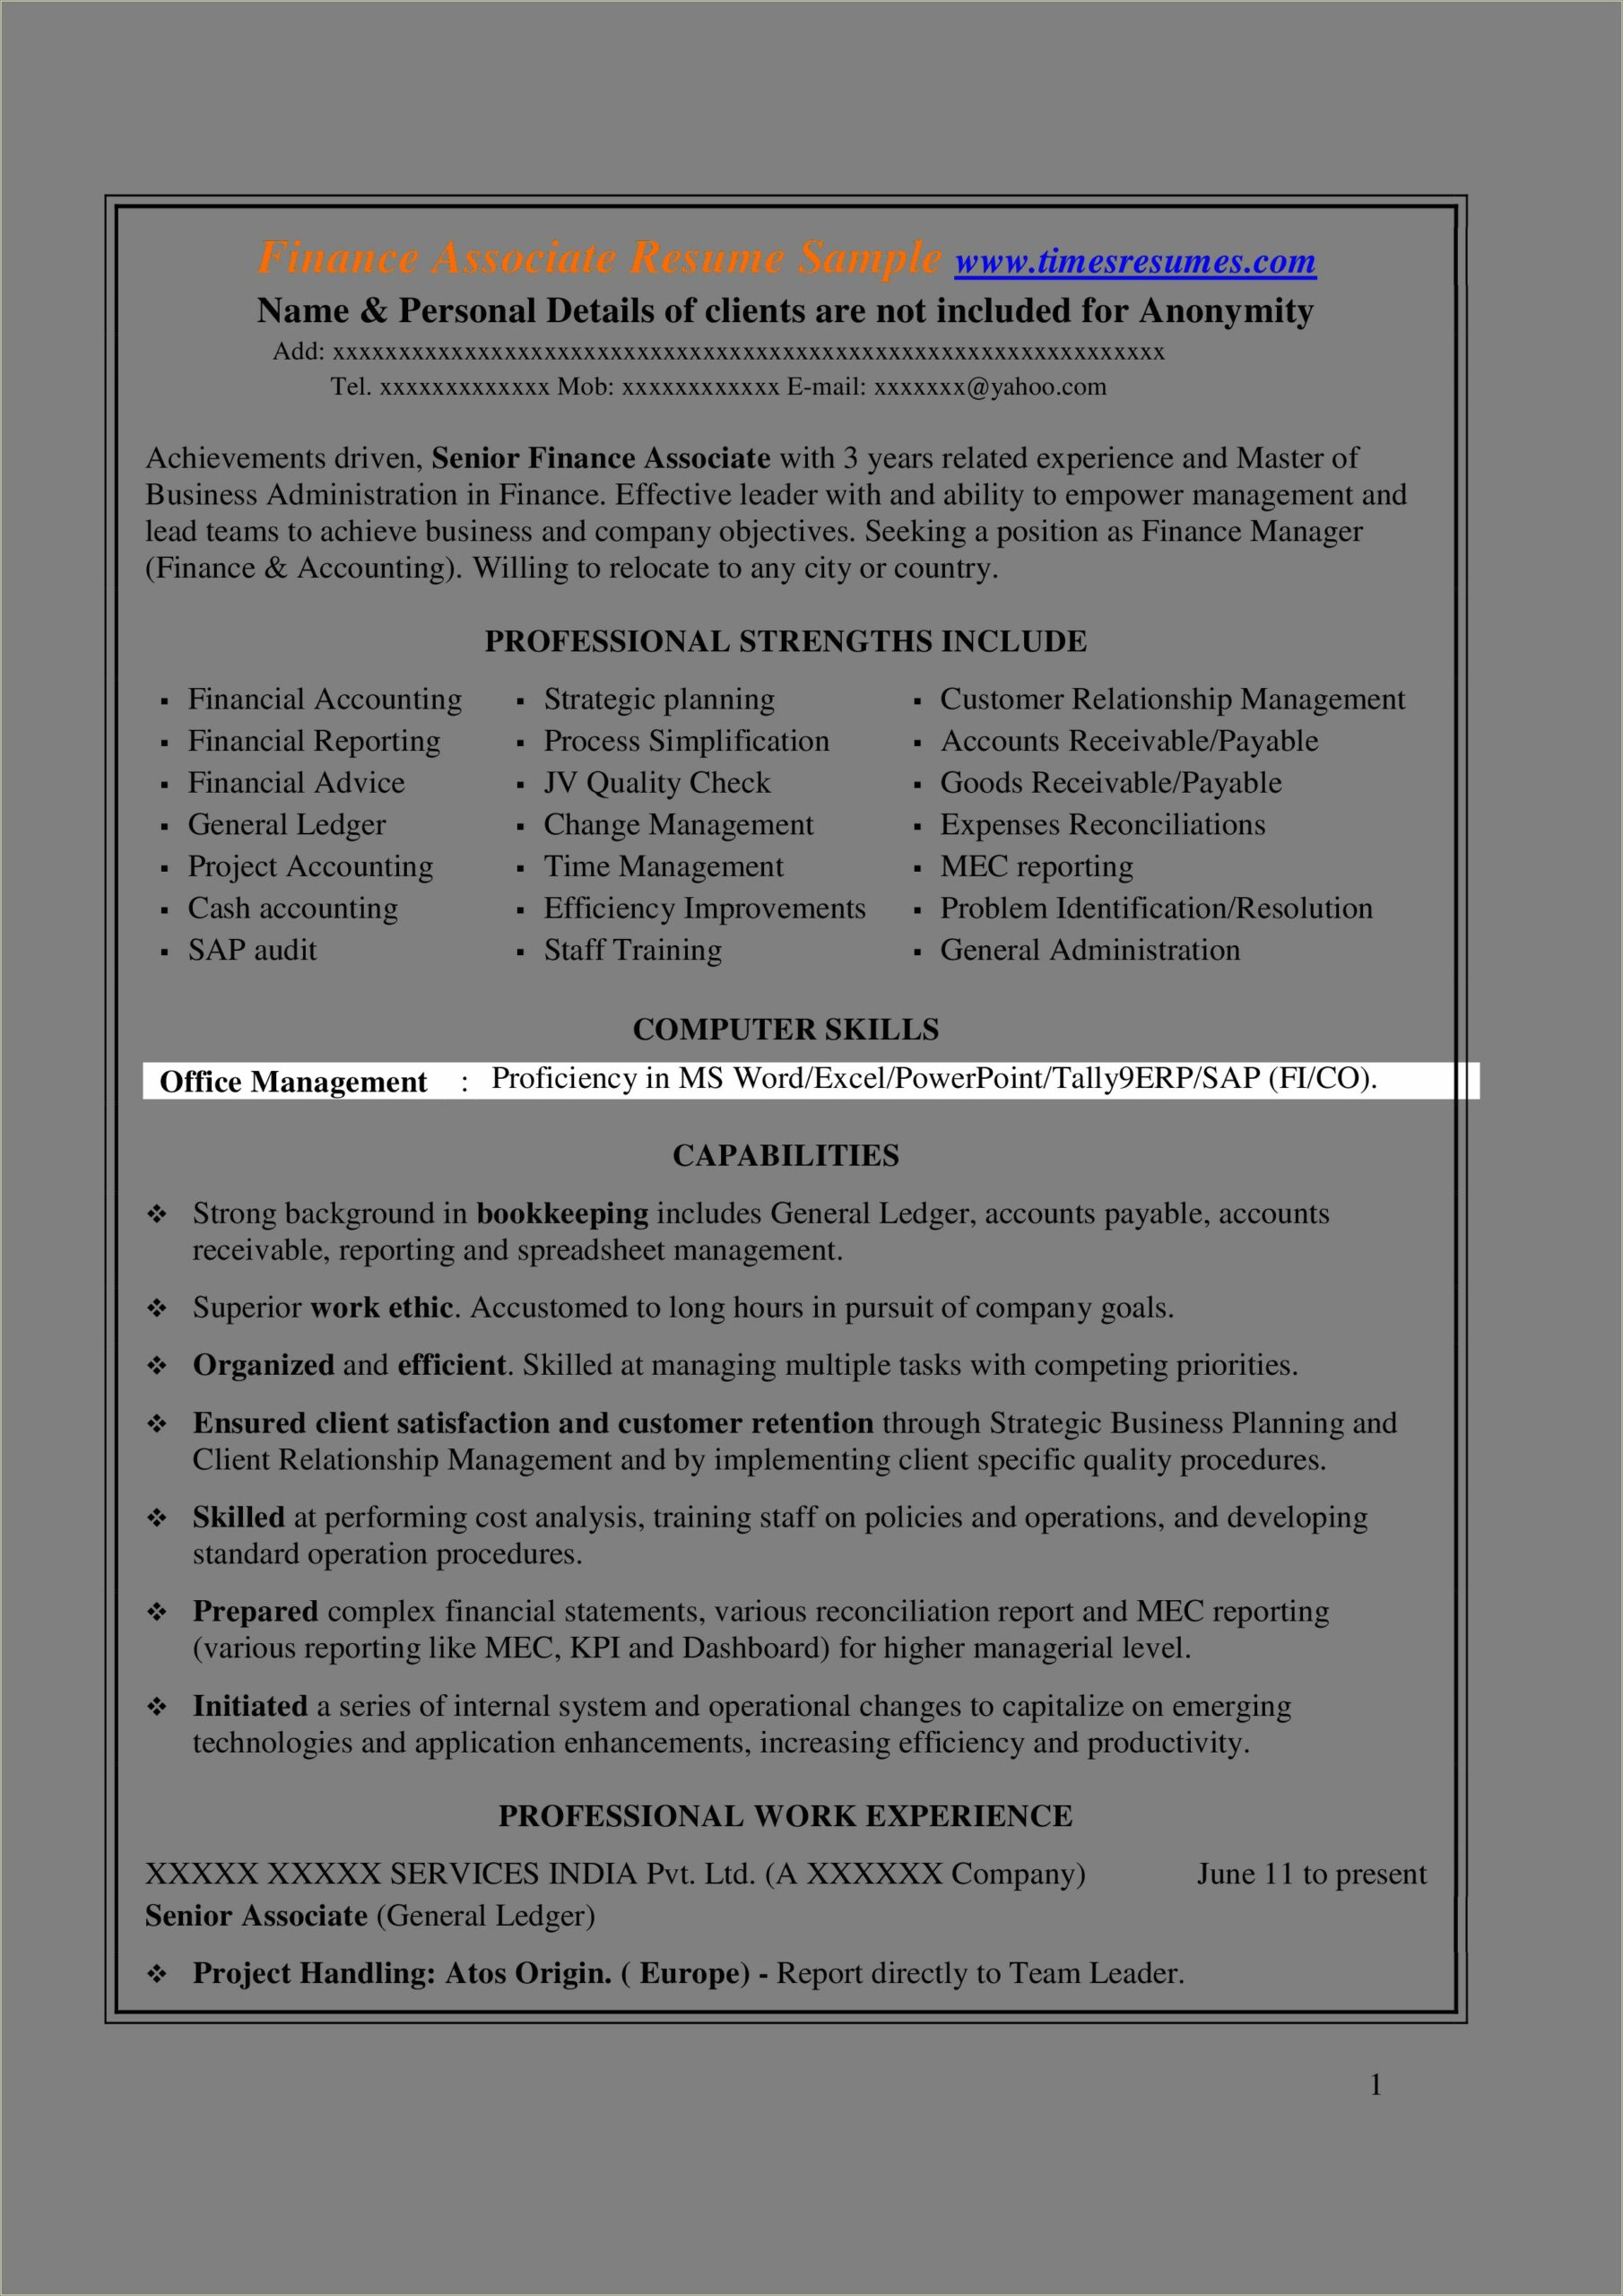 Efficiently Managed Multiple Tasks In Resume Projects